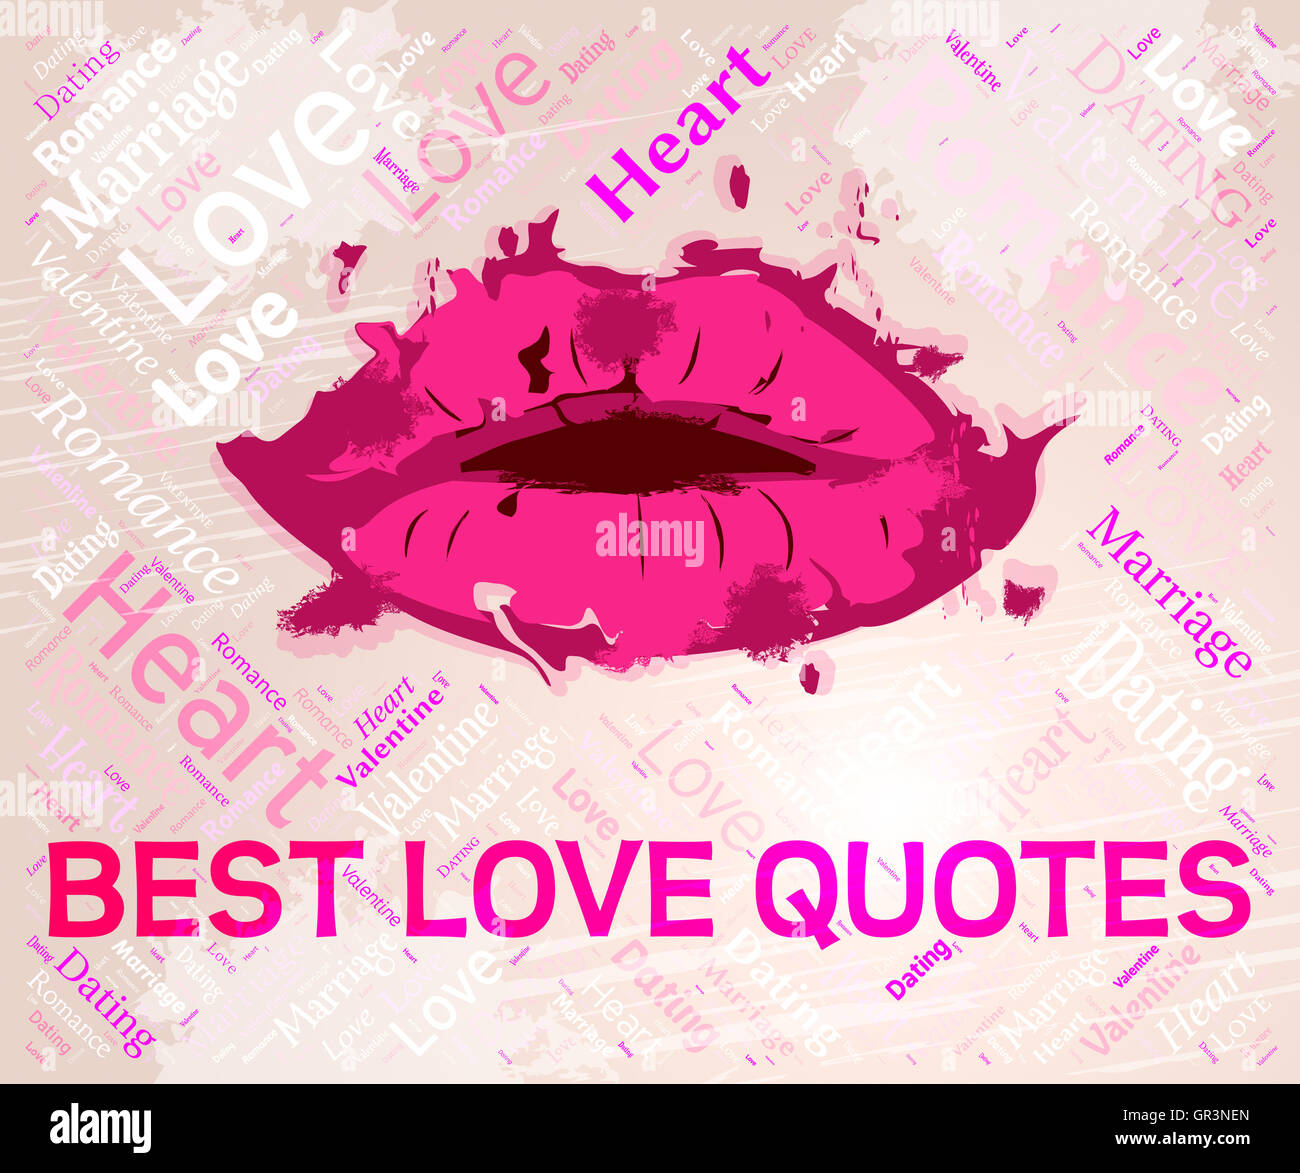 Best Love Quotes Representing Lover Compassionate And Winners Stock Photo